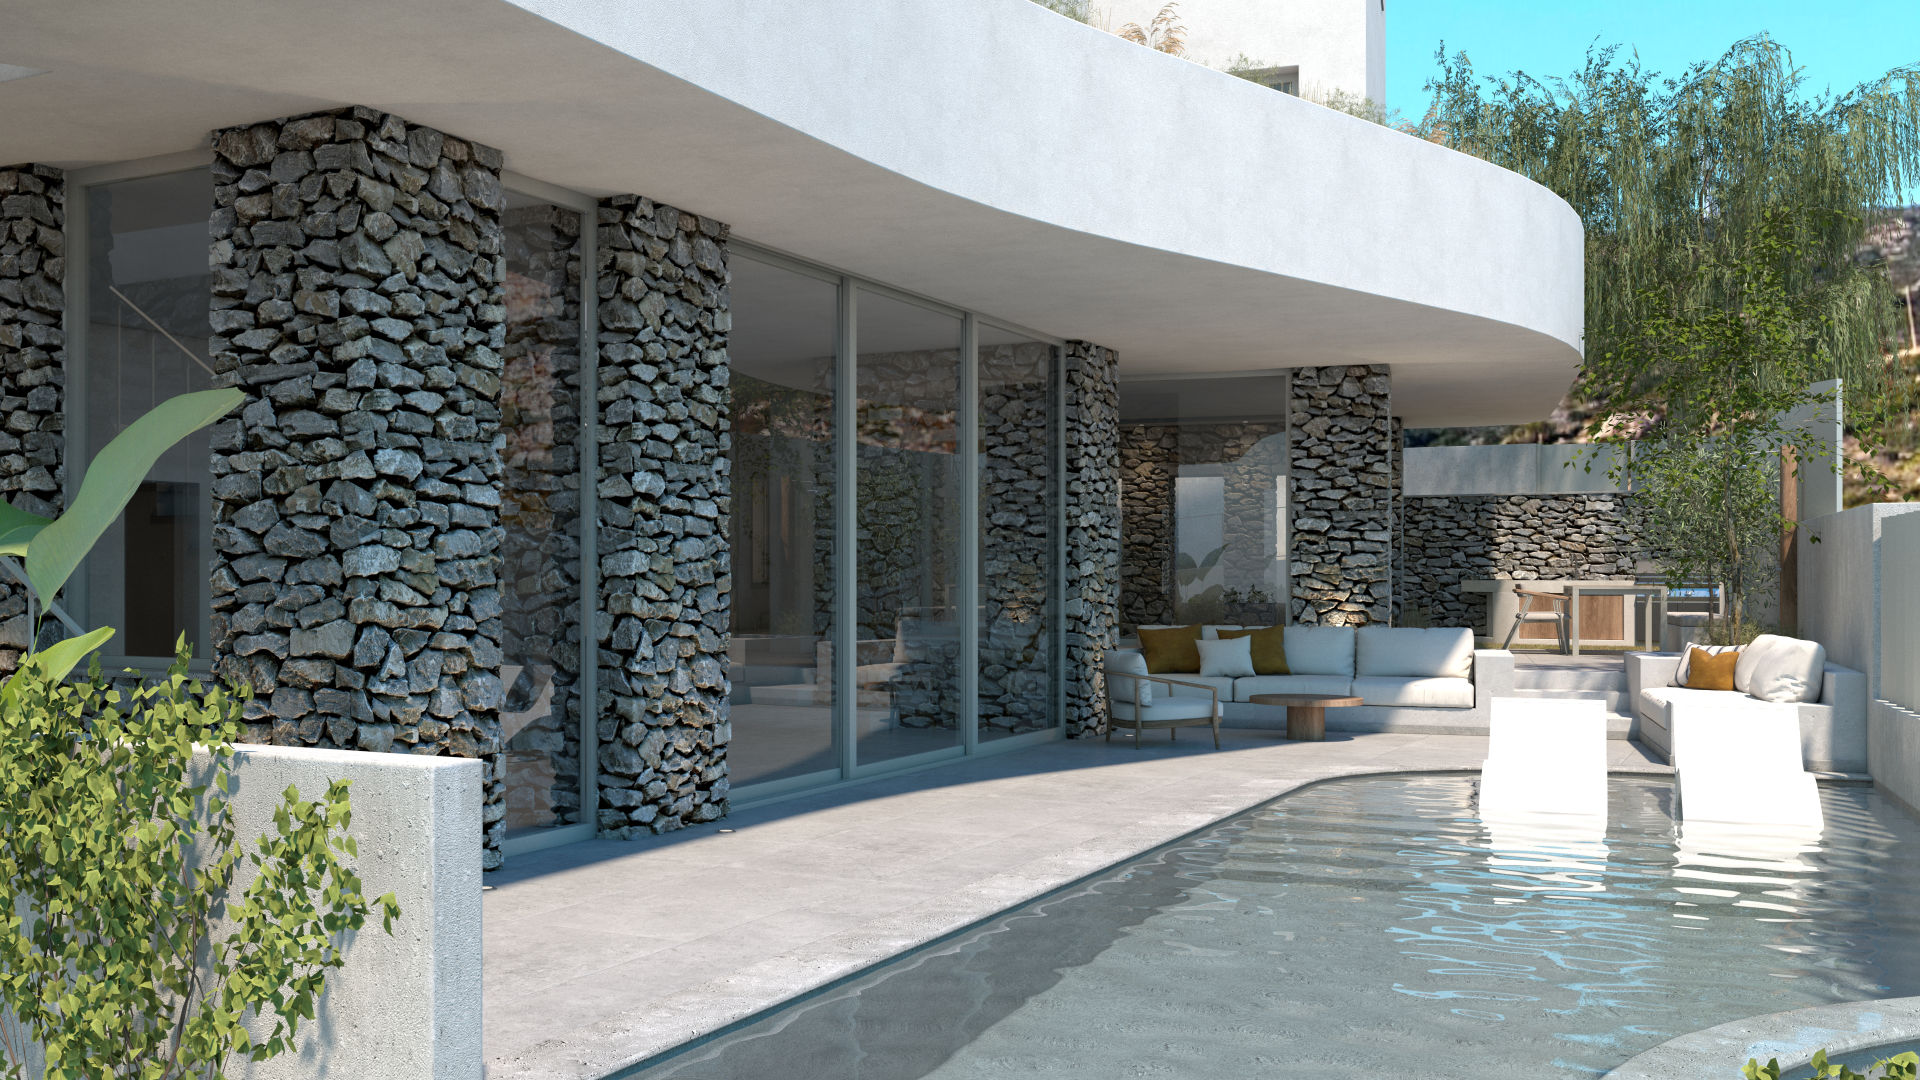 Ground Up residence,outdoor space,facade,stone, pool